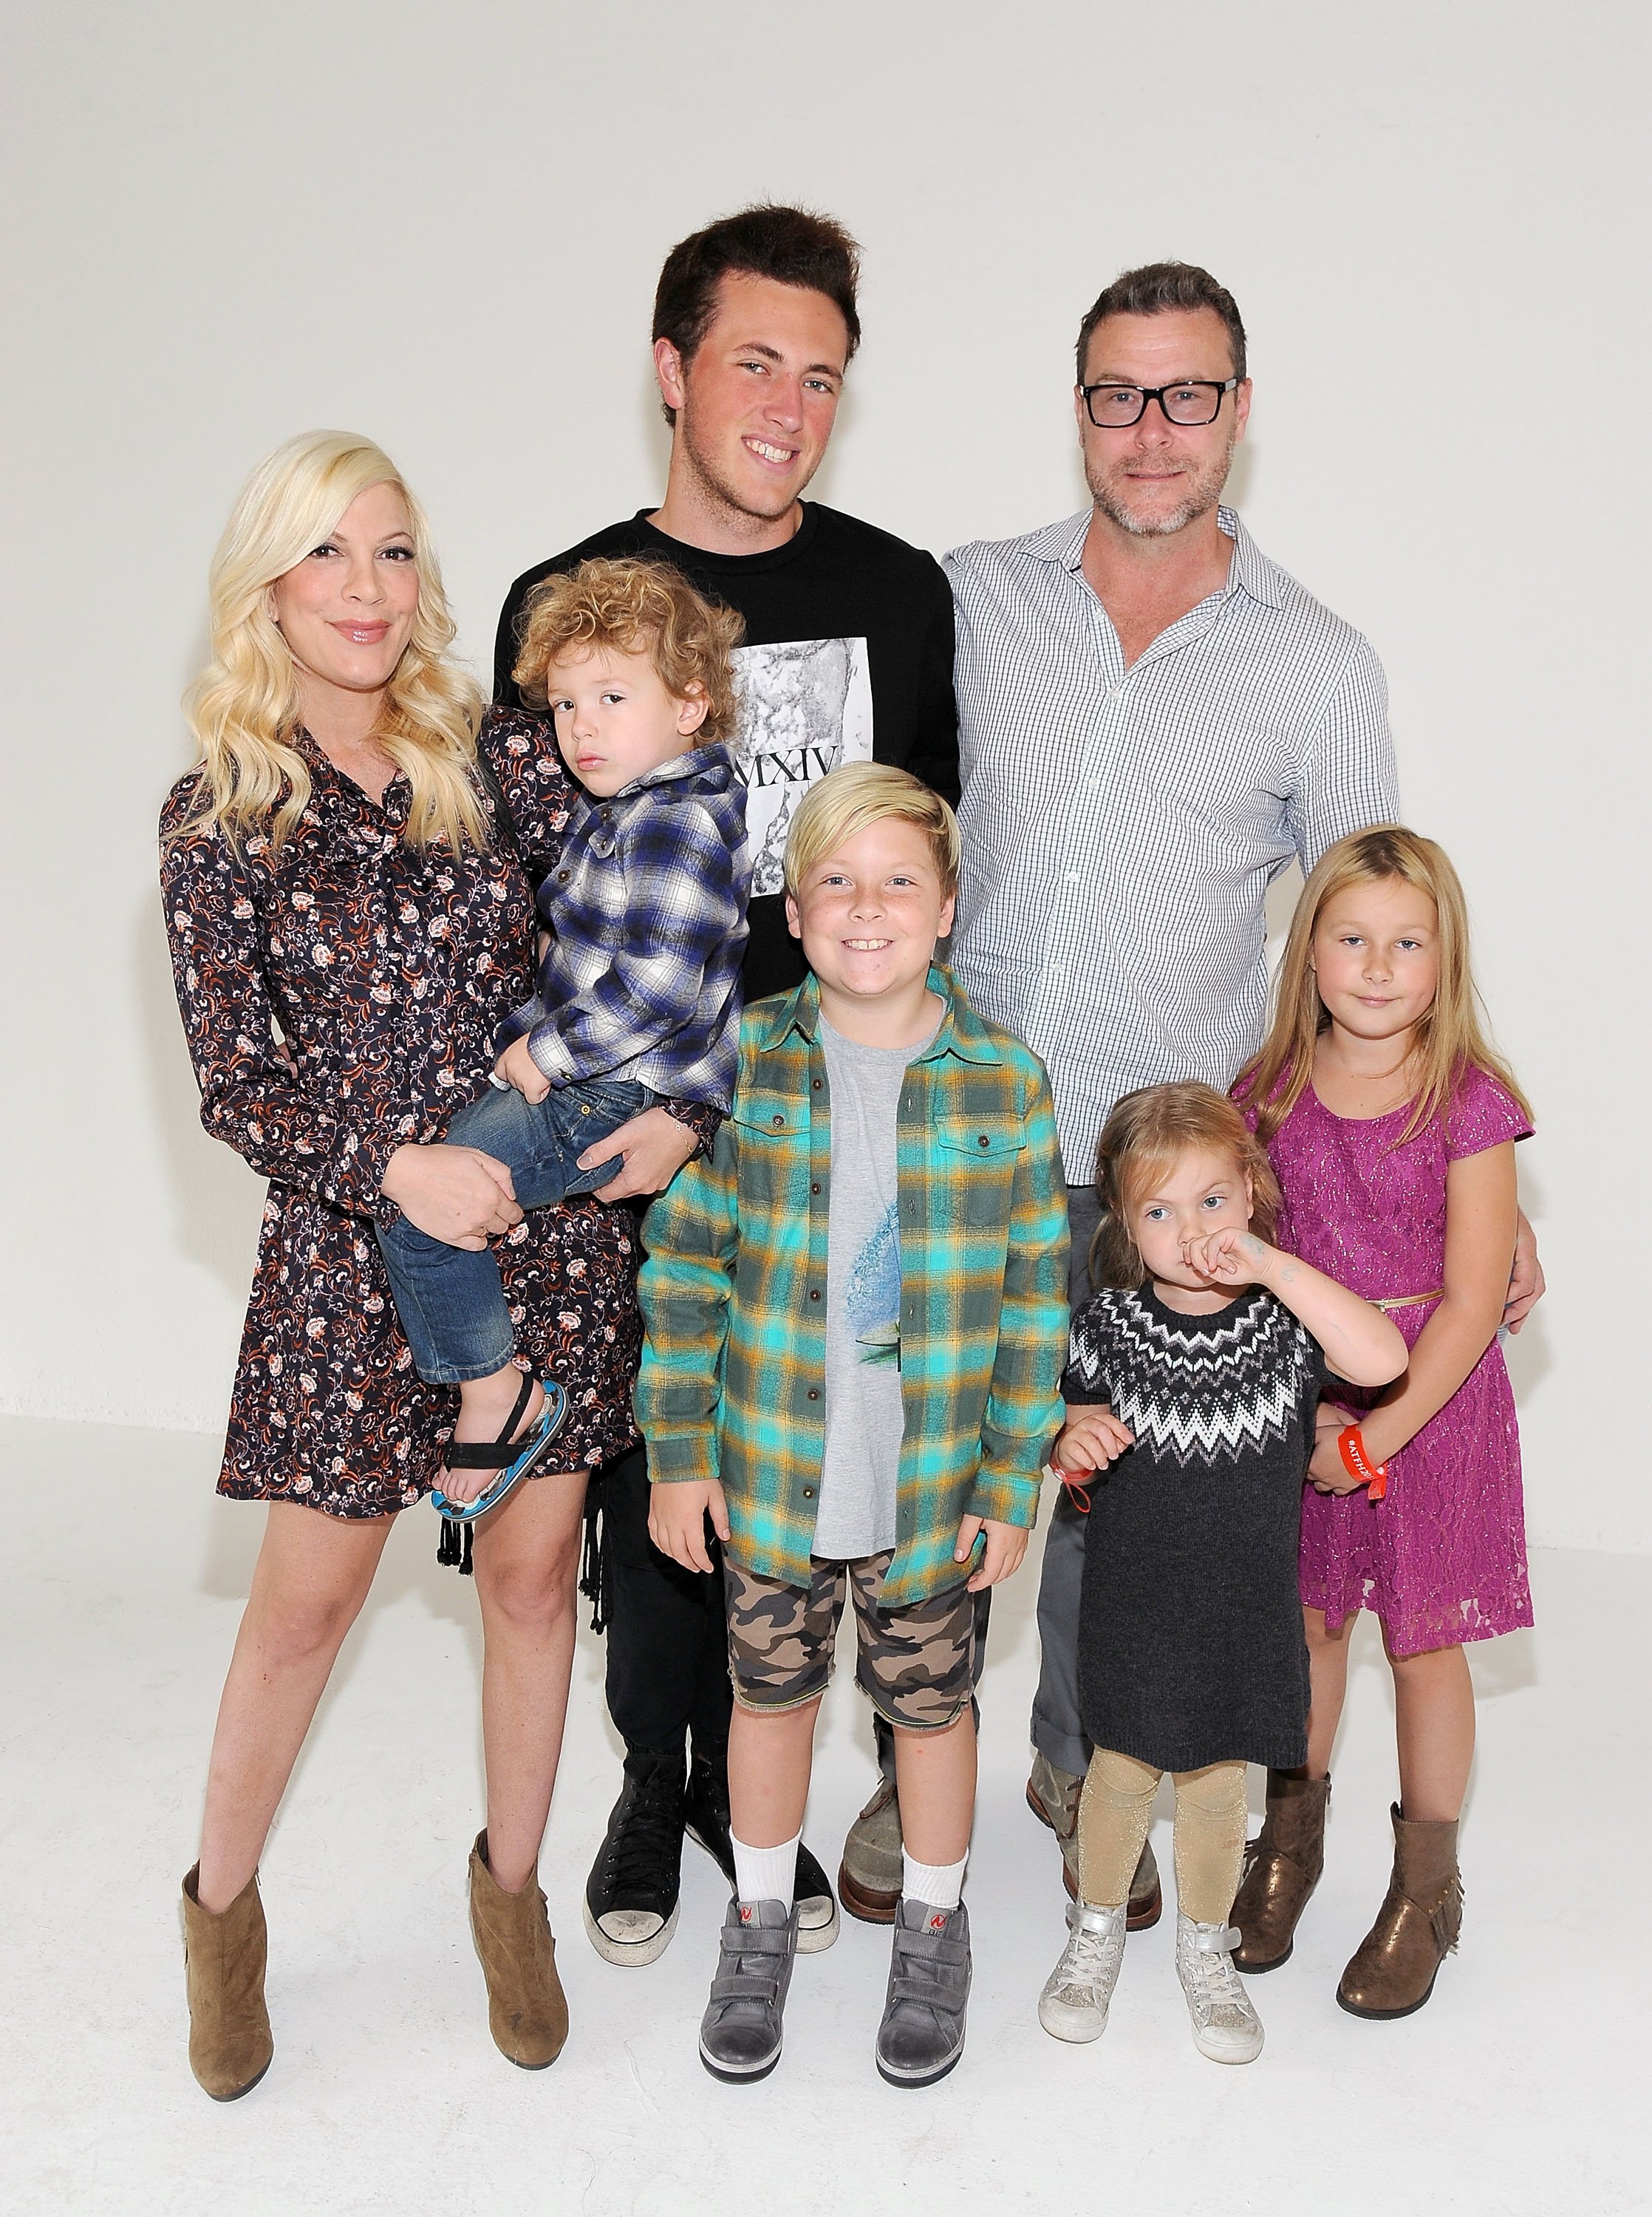 Tori Spelling and Dean McDermott with their children attend the Elizabeth Glaser Pediatric AIDS Foundation's 26th Annual A Time For Heroes Family Festival at Smashbox Studios